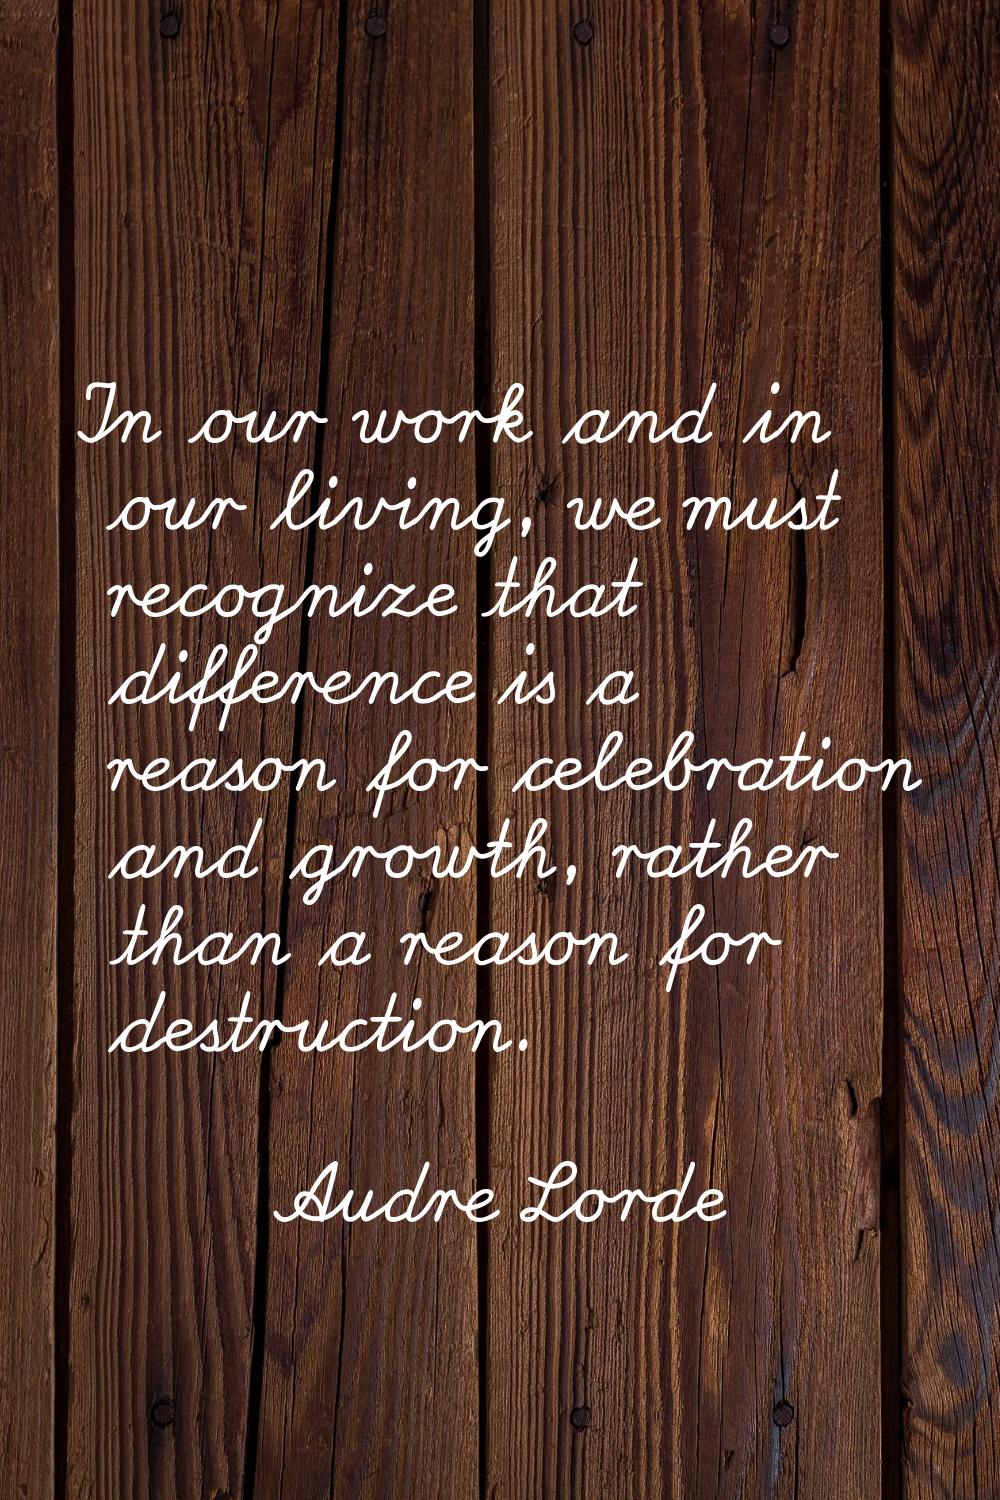 In our work and in our living, we must recognize that difference is a reason for celebration and gr